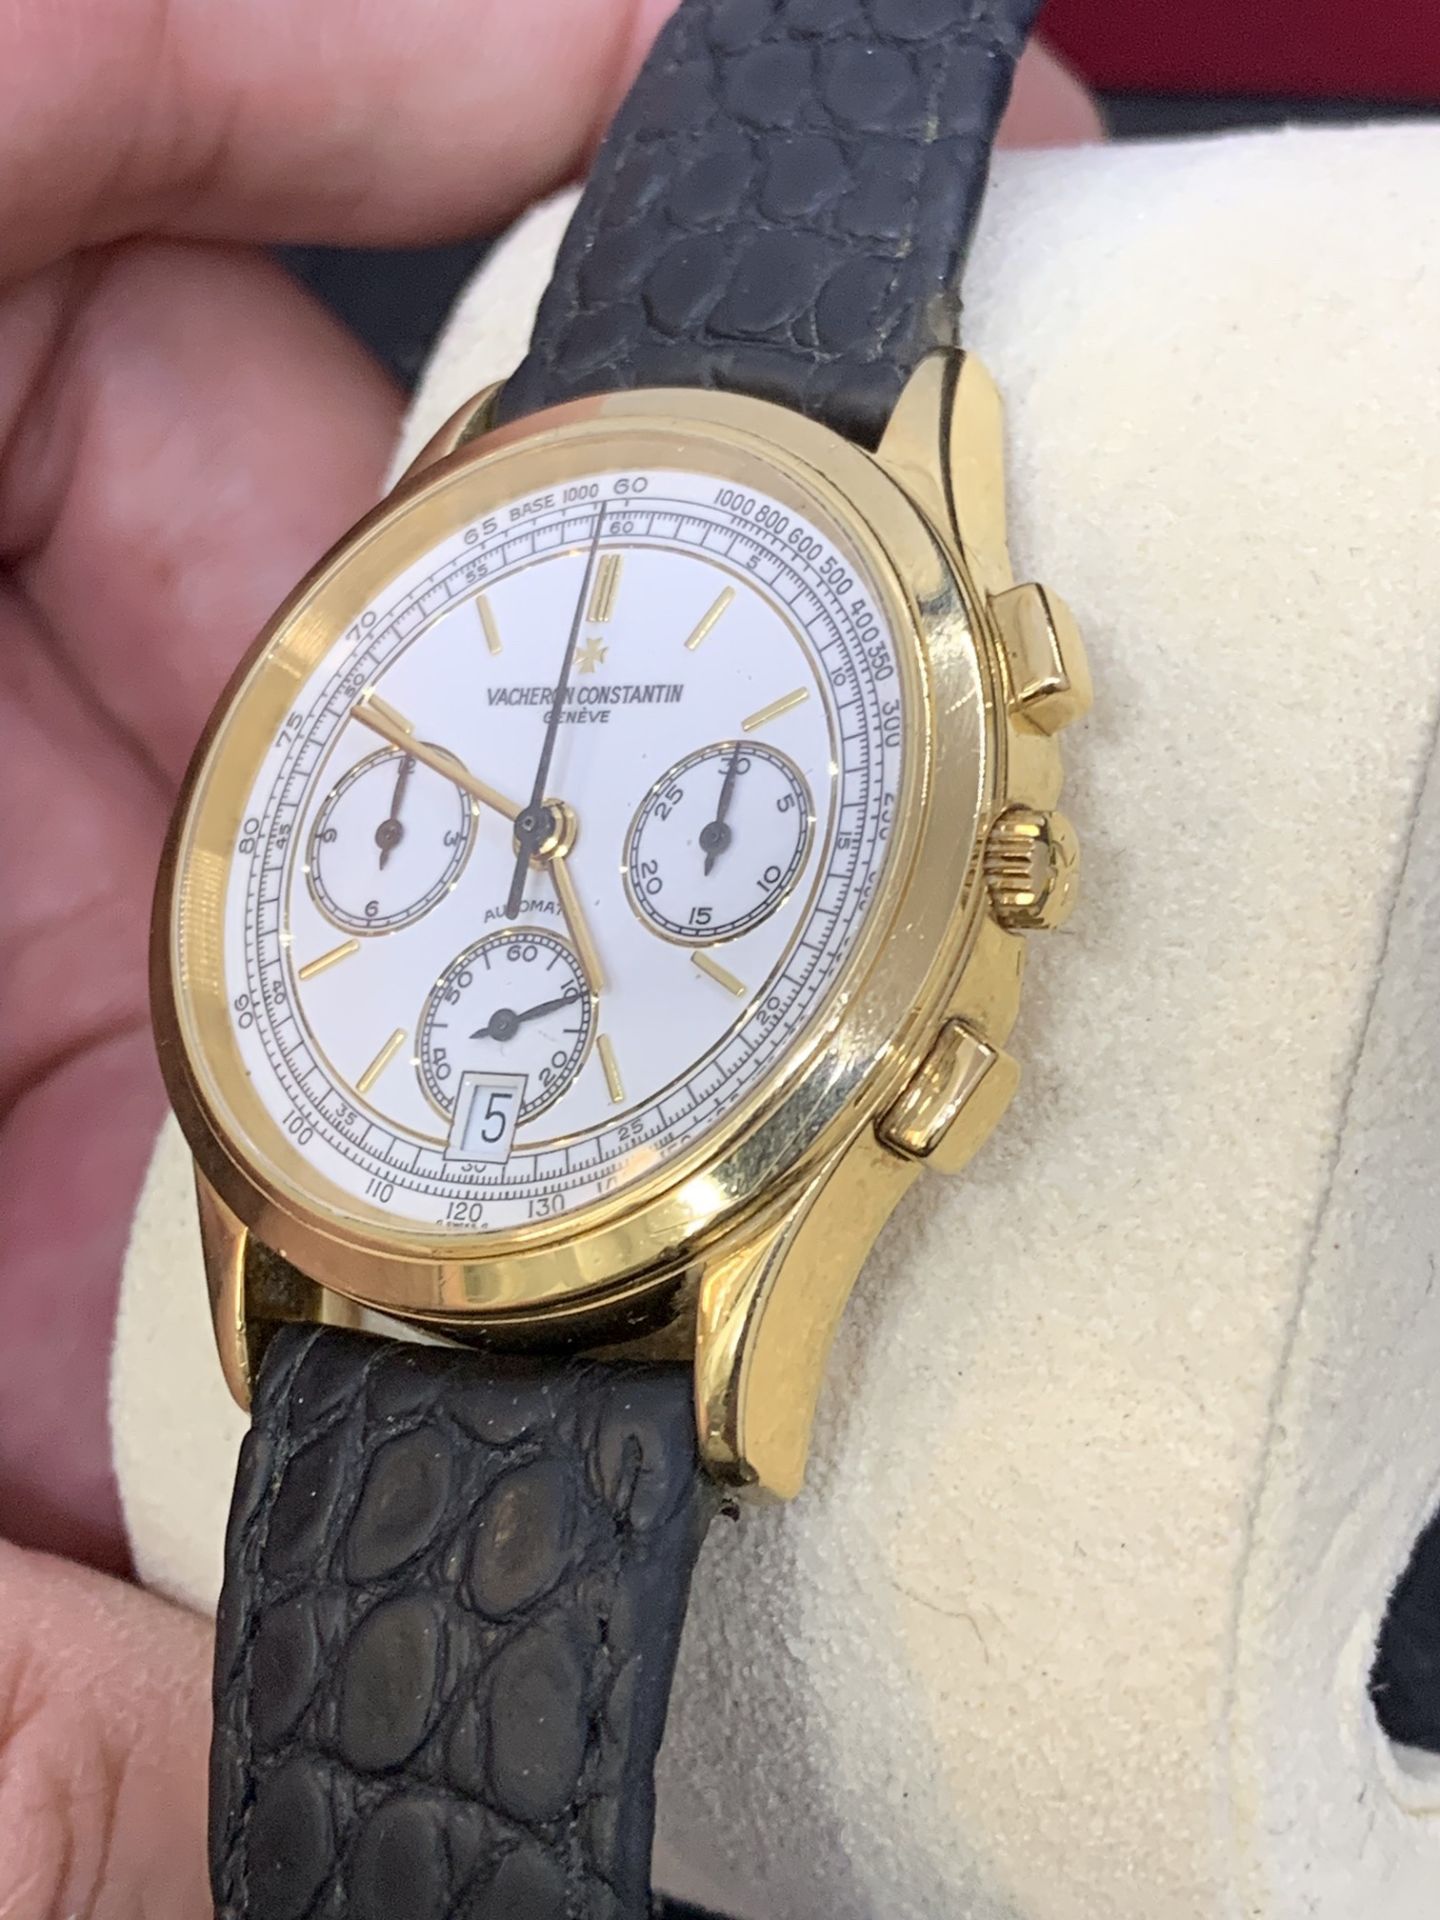 18ct GOLD VACHERON CONSTANTIN CHRONOGRAPH AUTOMATIC WATCH - Image 2 of 8